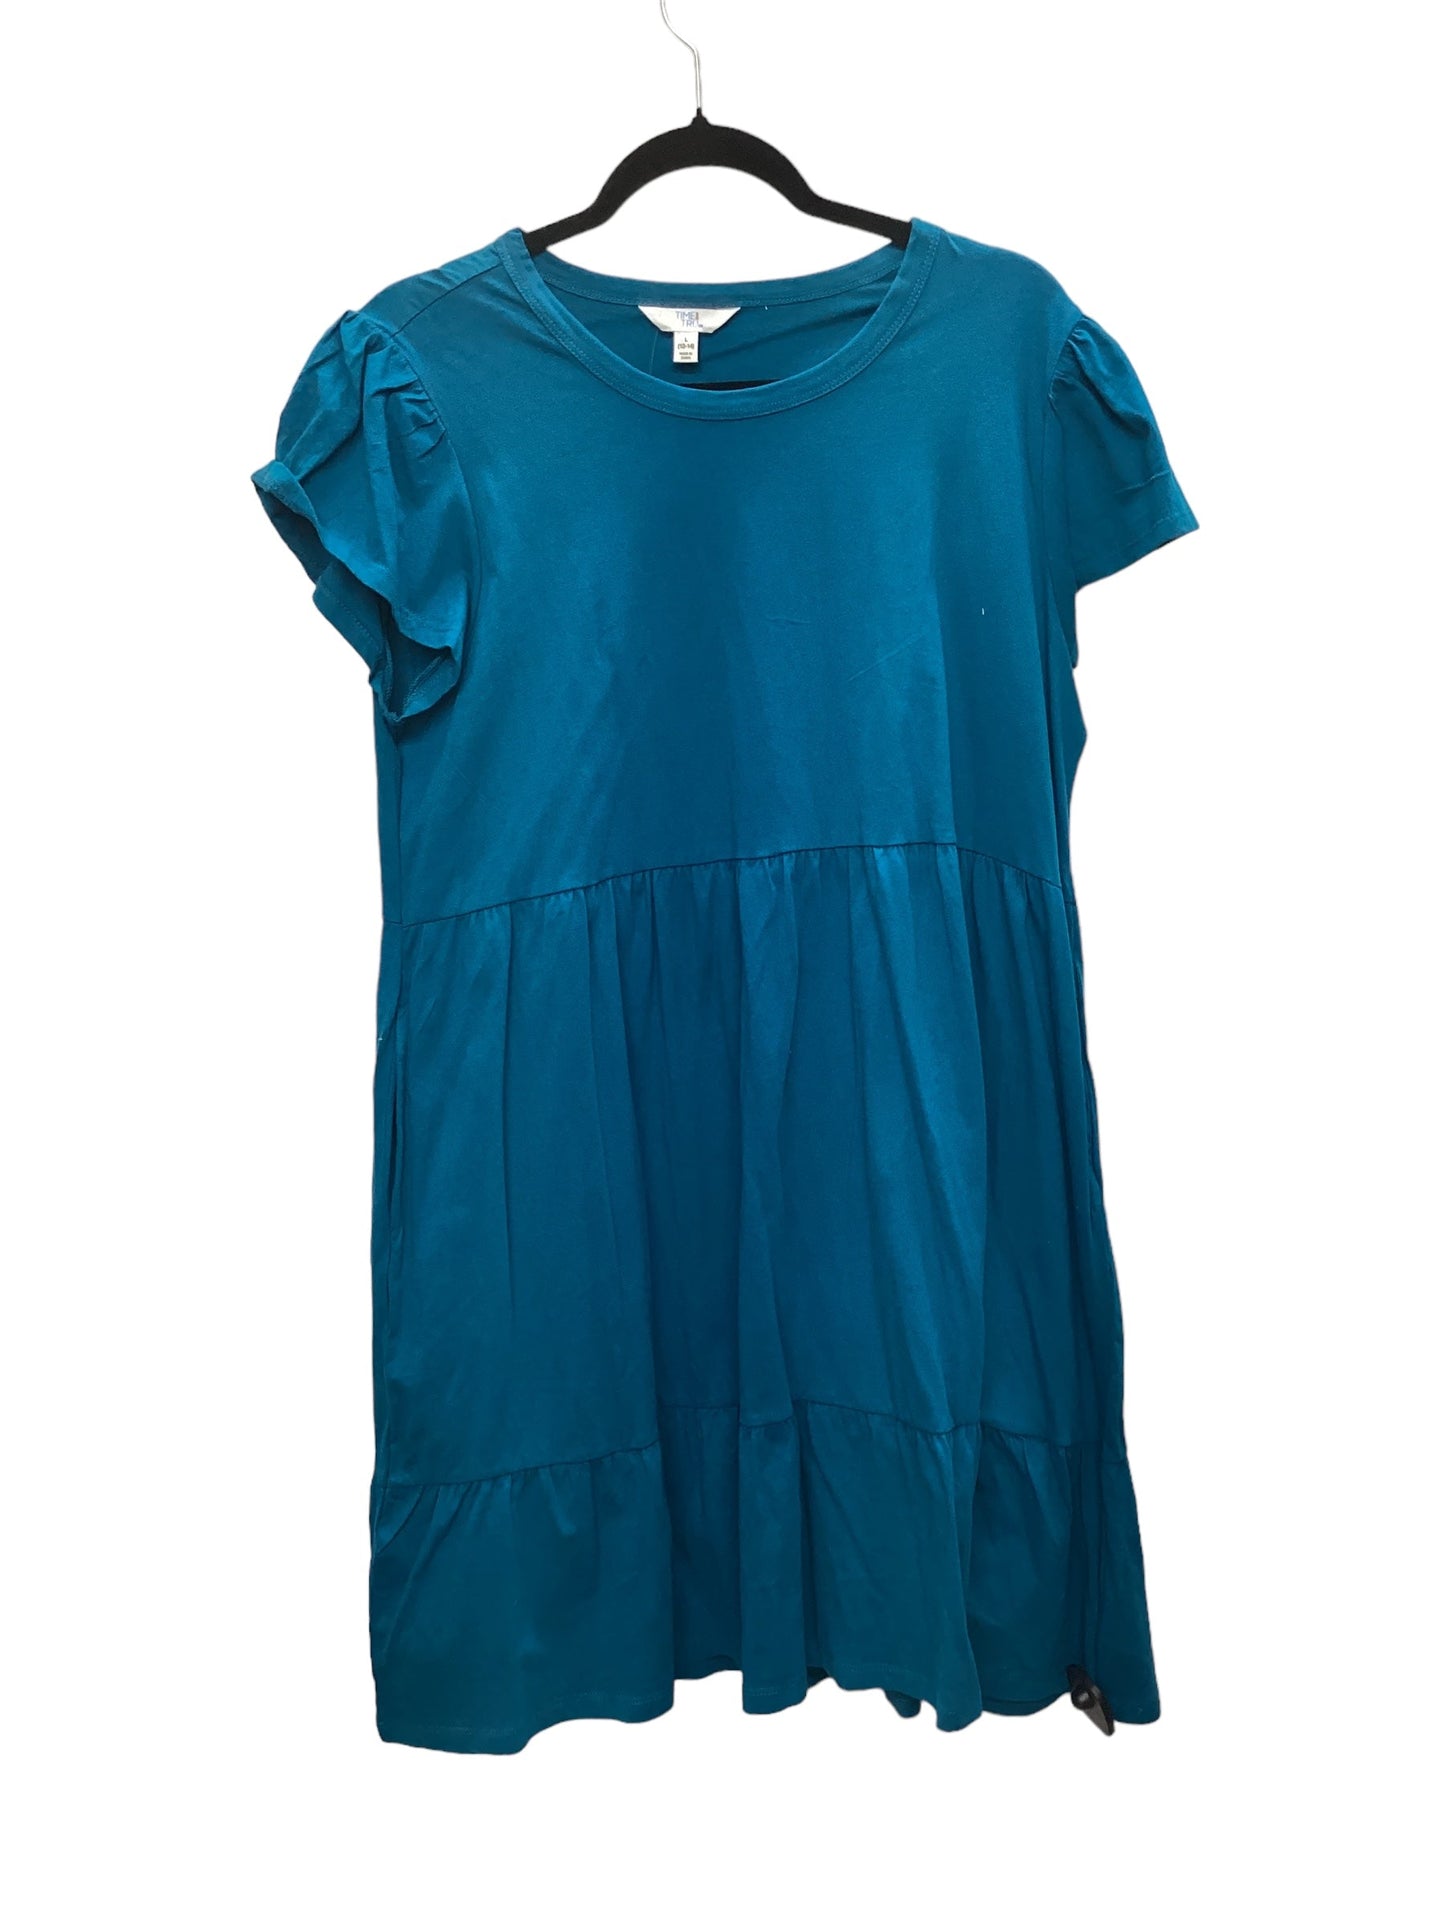 Blue Dress Casual Short Time And Tru, Size L